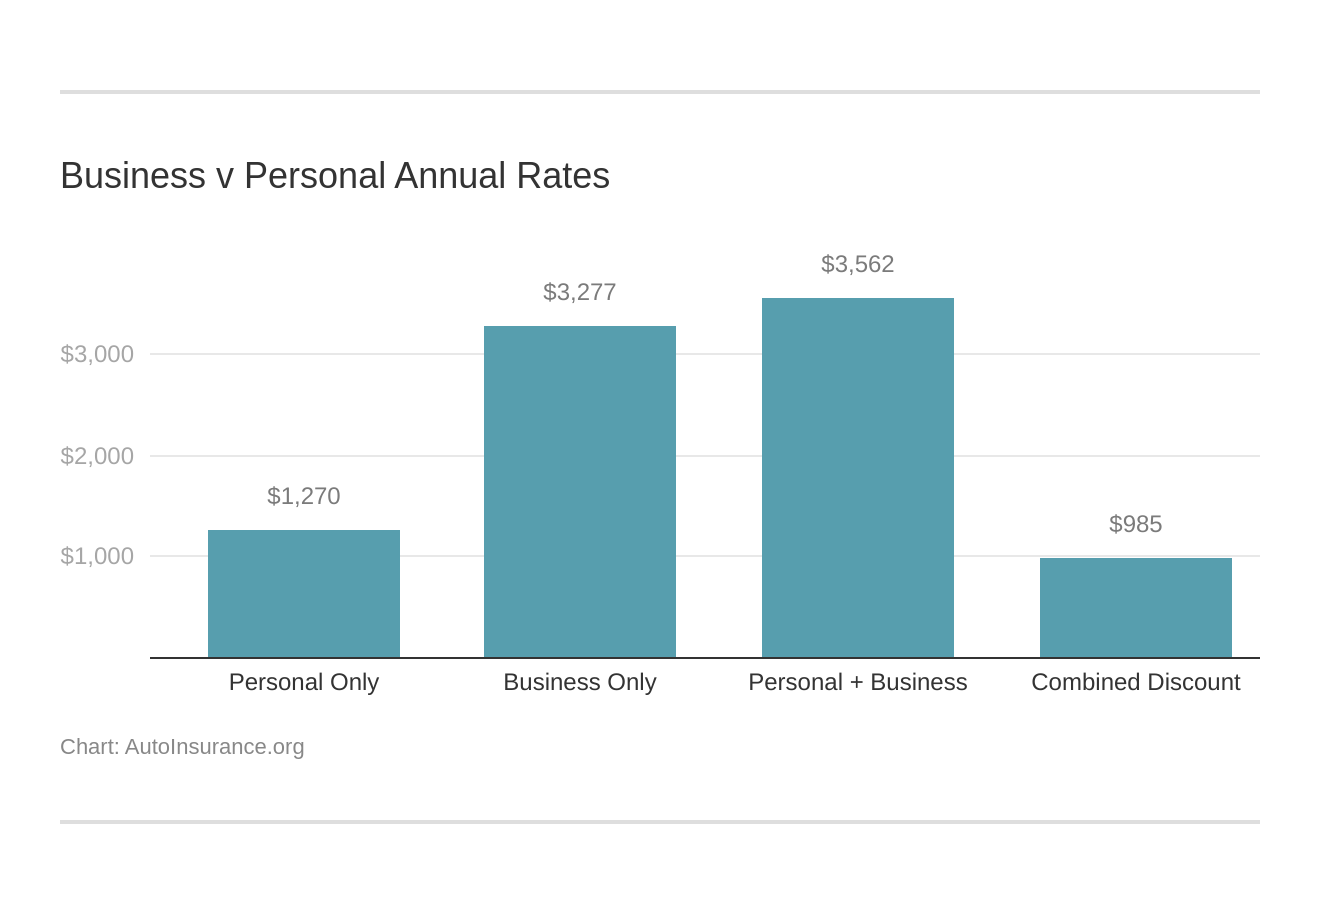 Business v Personal Annual Rates